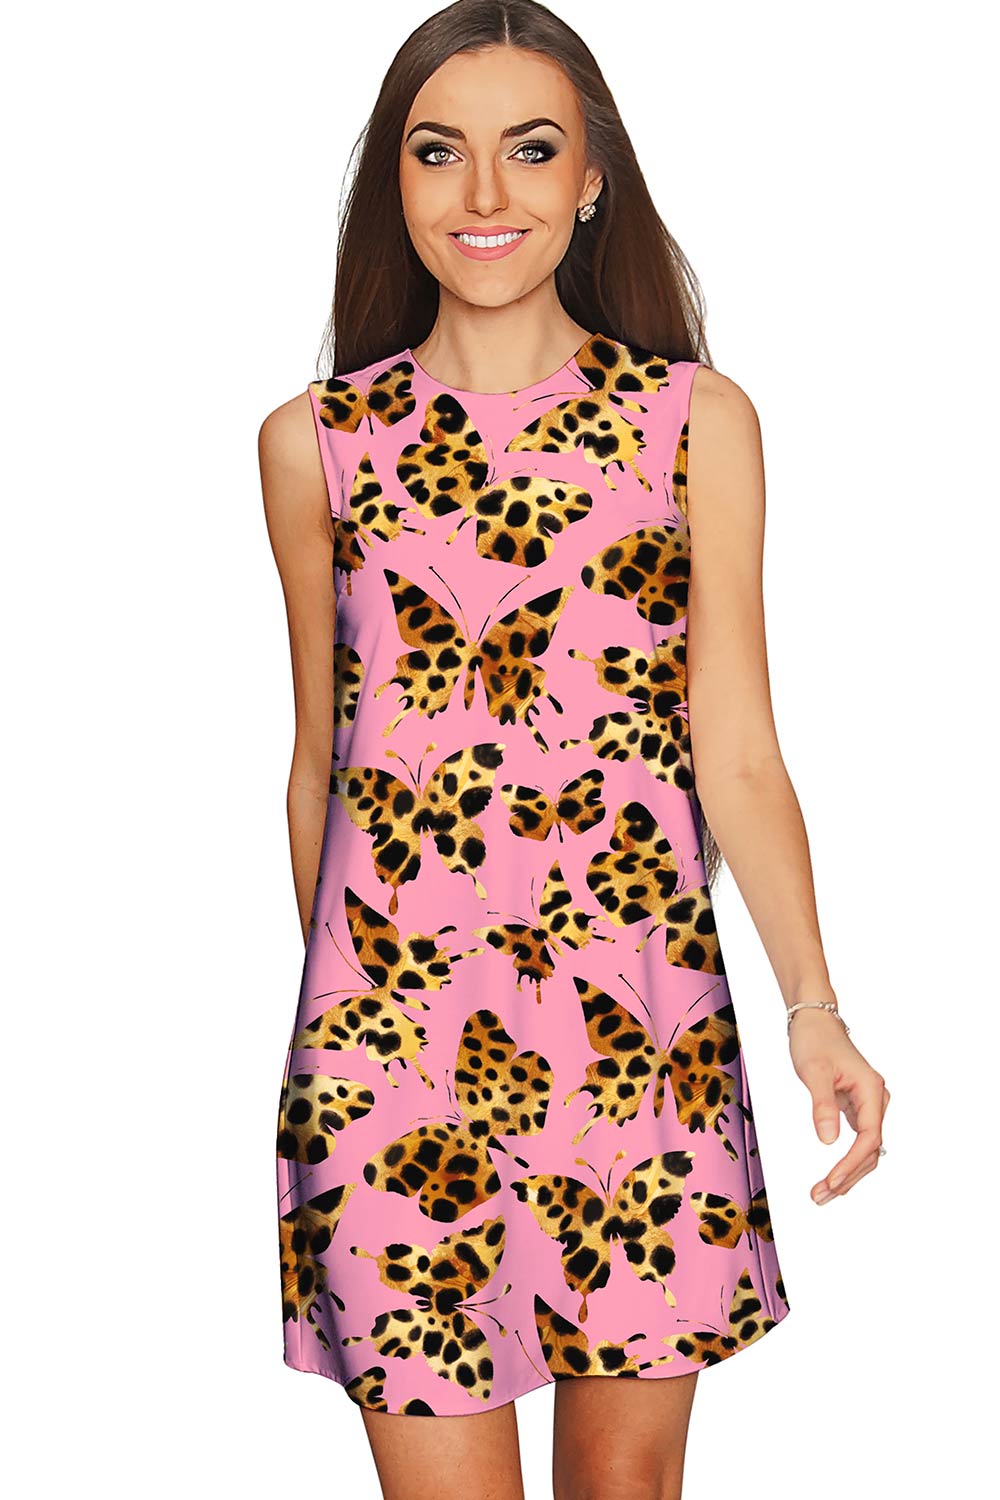 Quaintrelle Adele Pink Butterfly Print Party Shift Mini Dress - Women - Pineapple Clothing